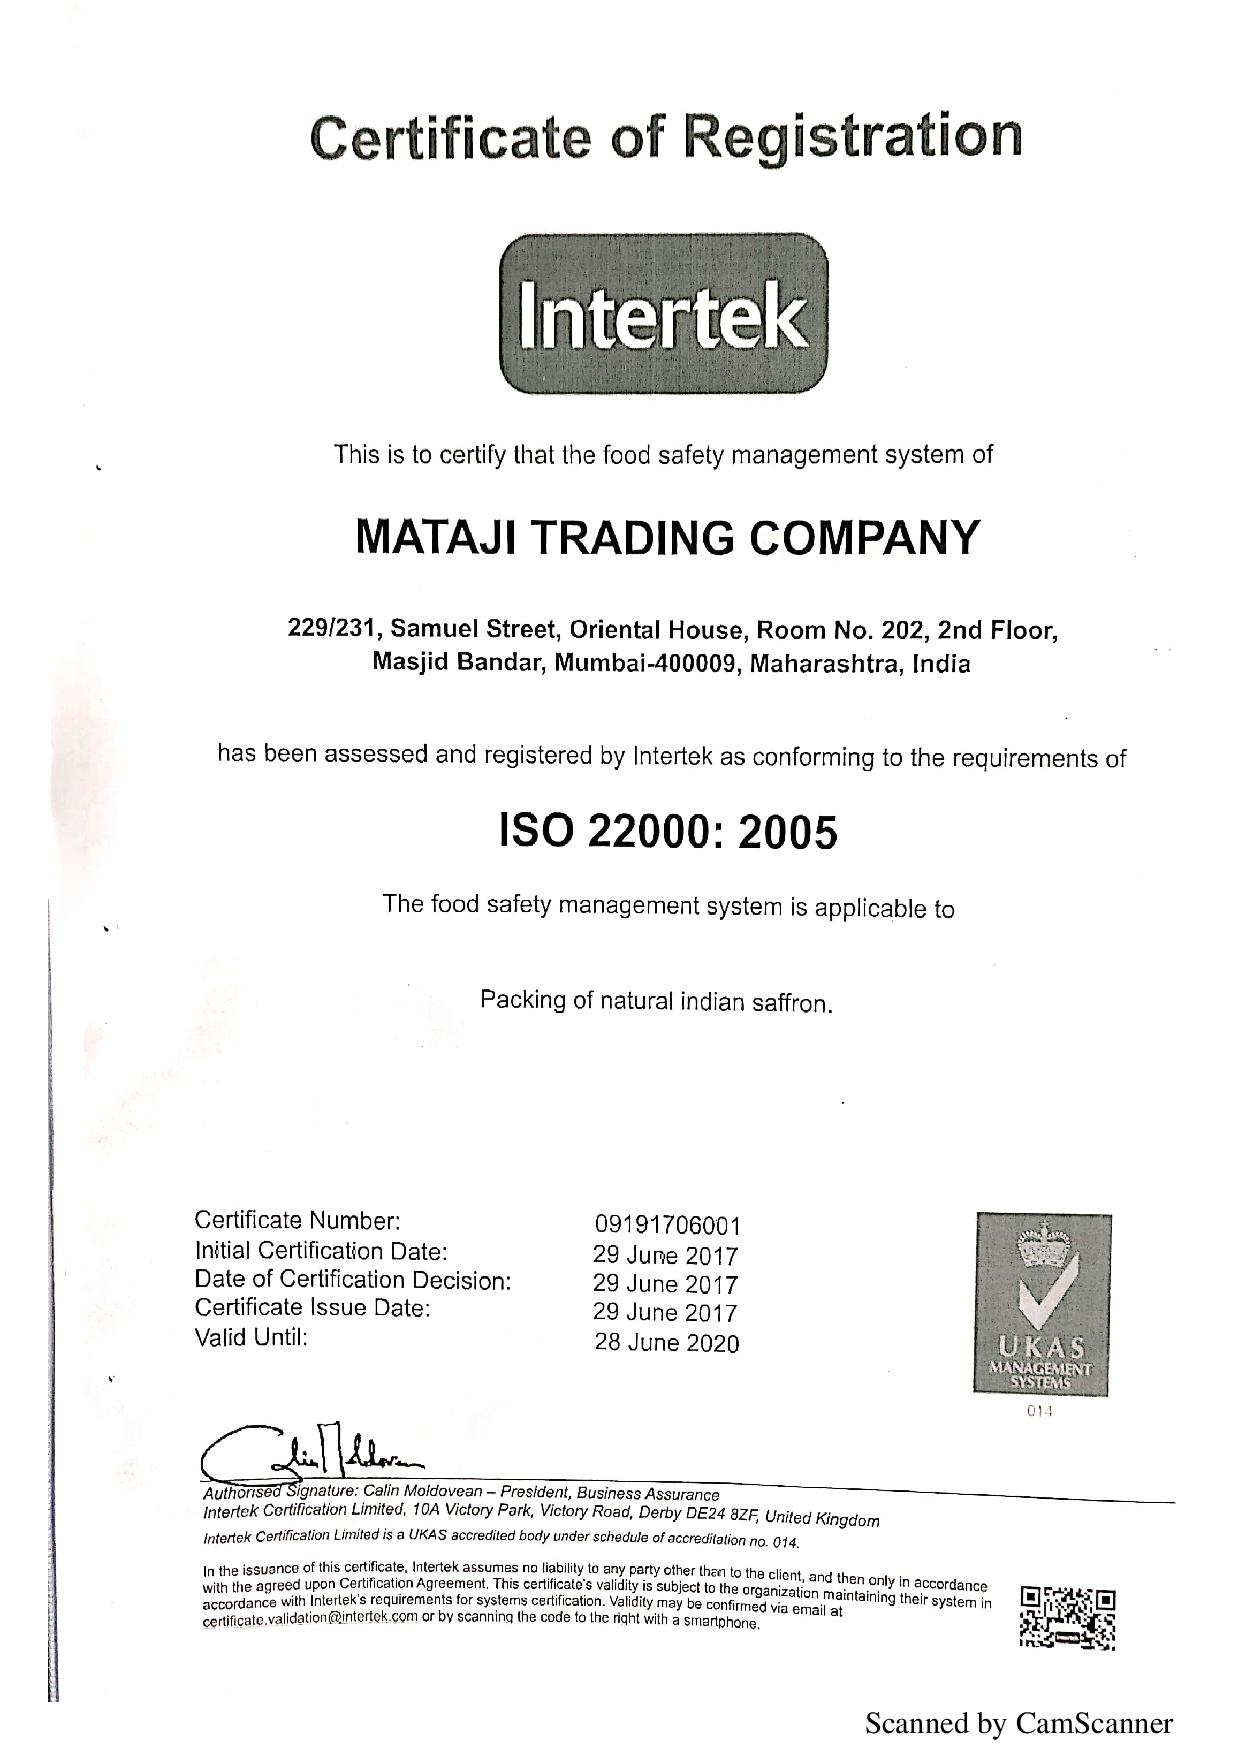 ISO Certificate 2000:2005